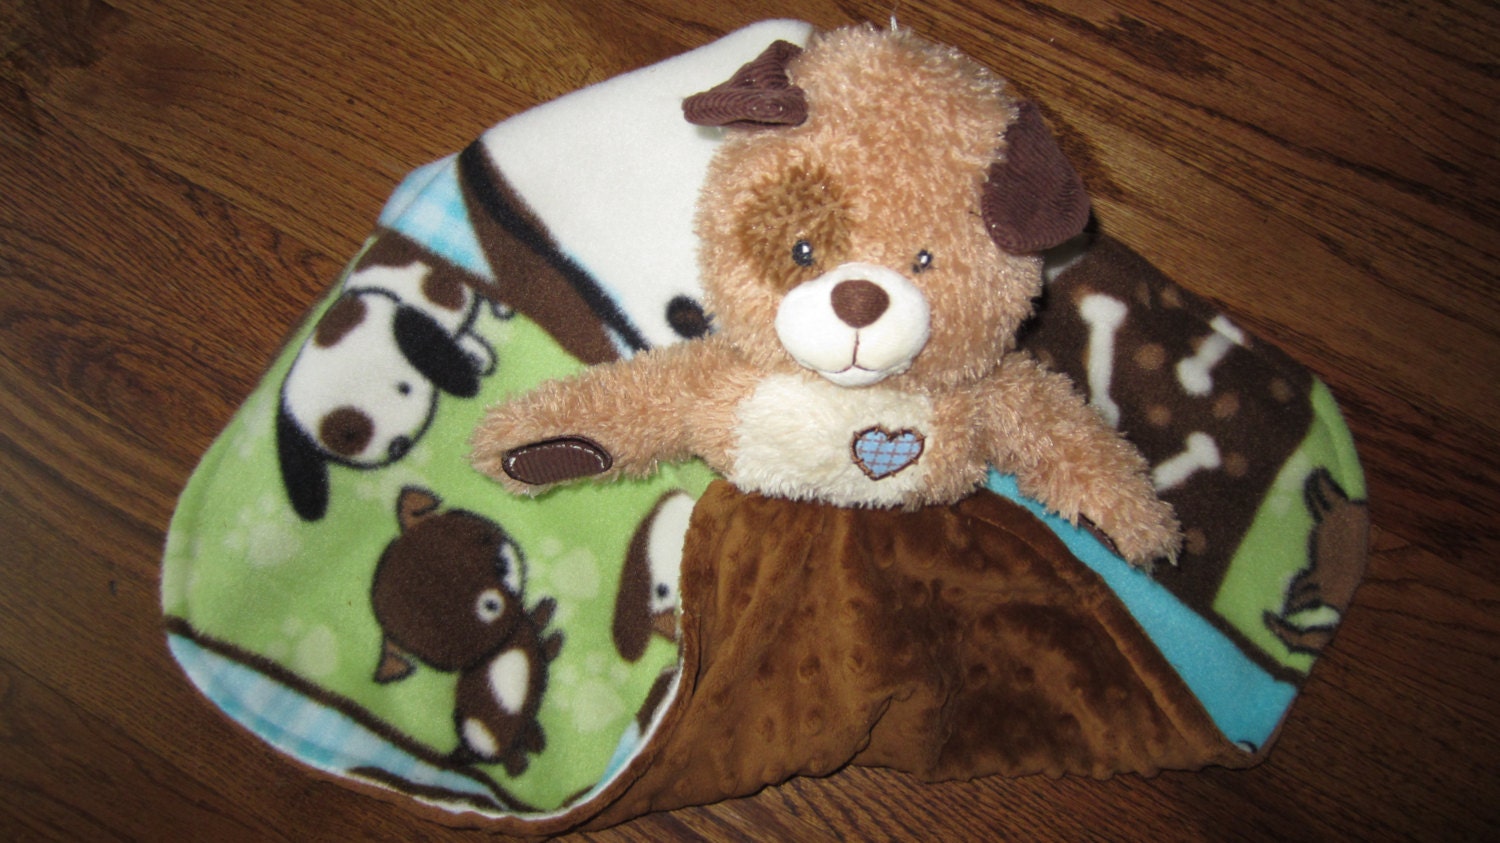 Security Blanket Baby Blanket Lovey Patches the Dog. by CuddlePets